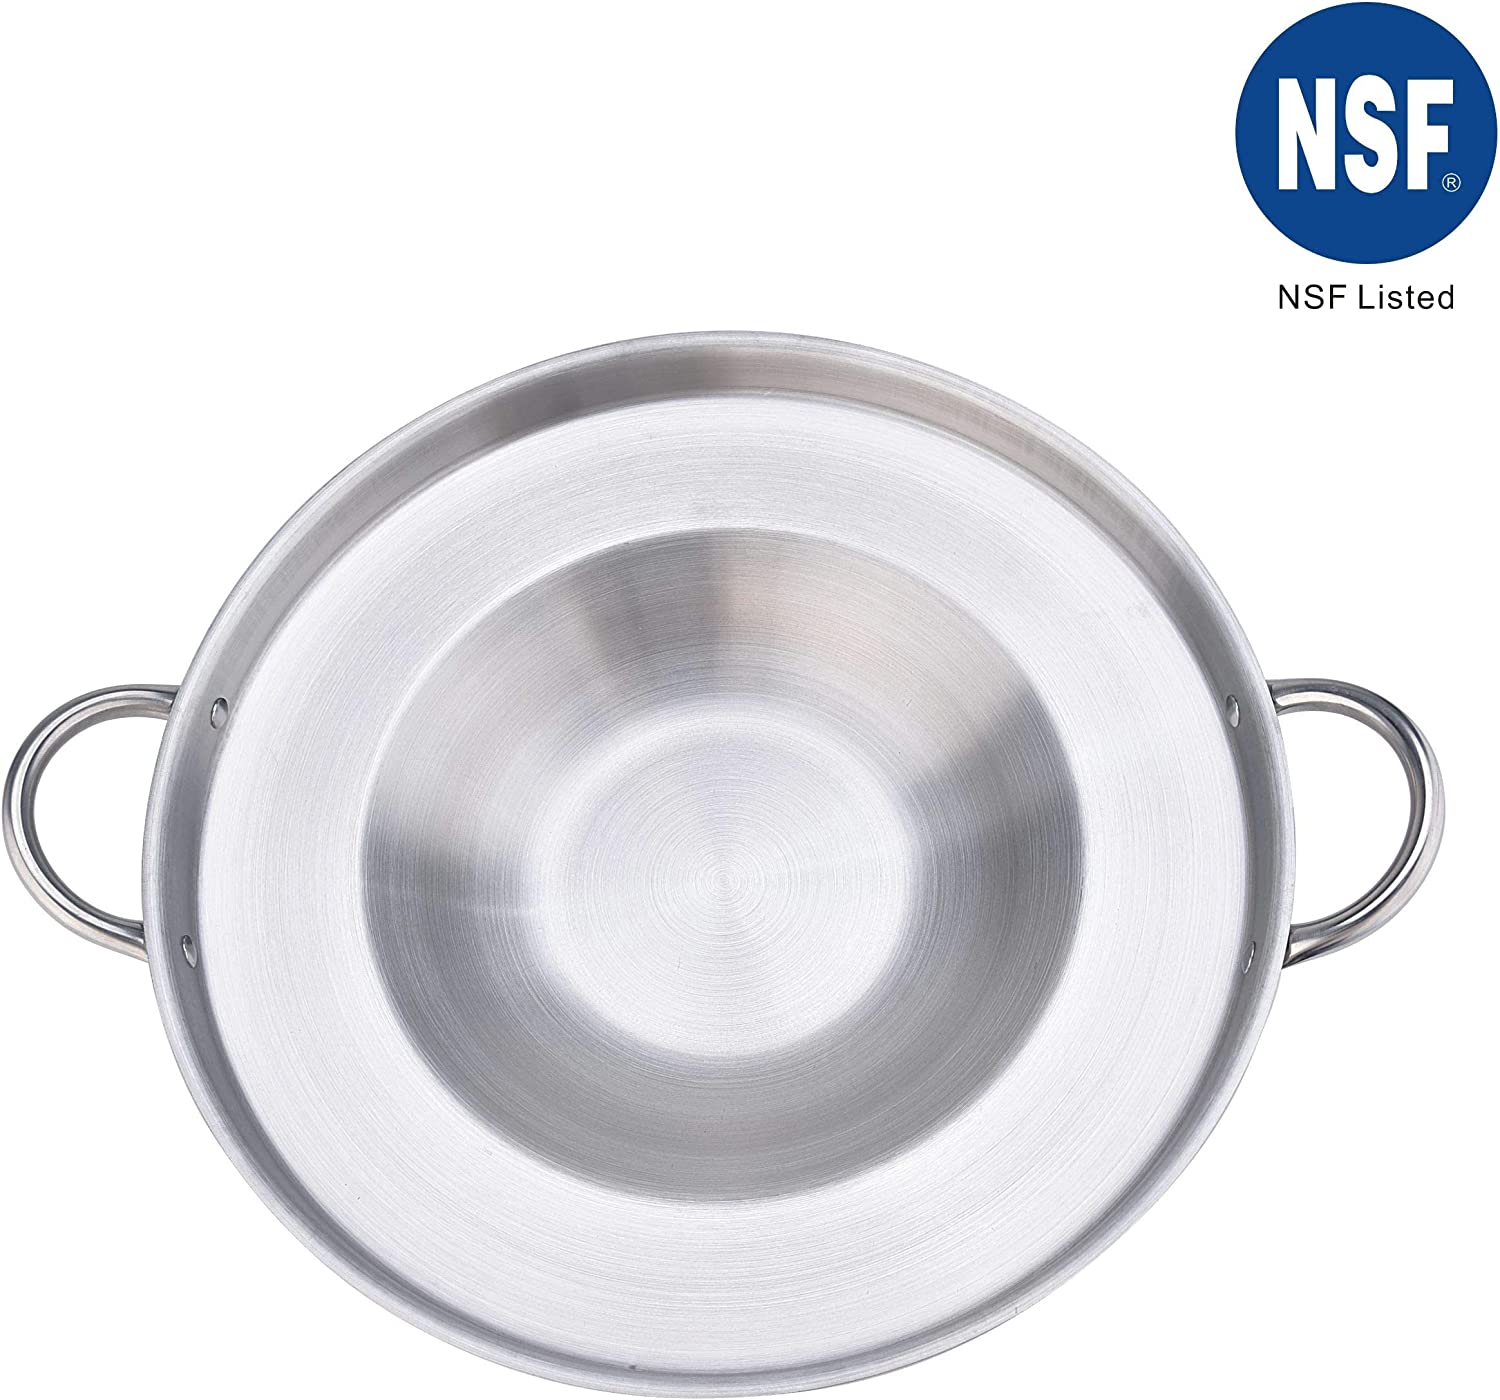 17 Oval Stainless Steel Fry Pan Comal – R & B Import